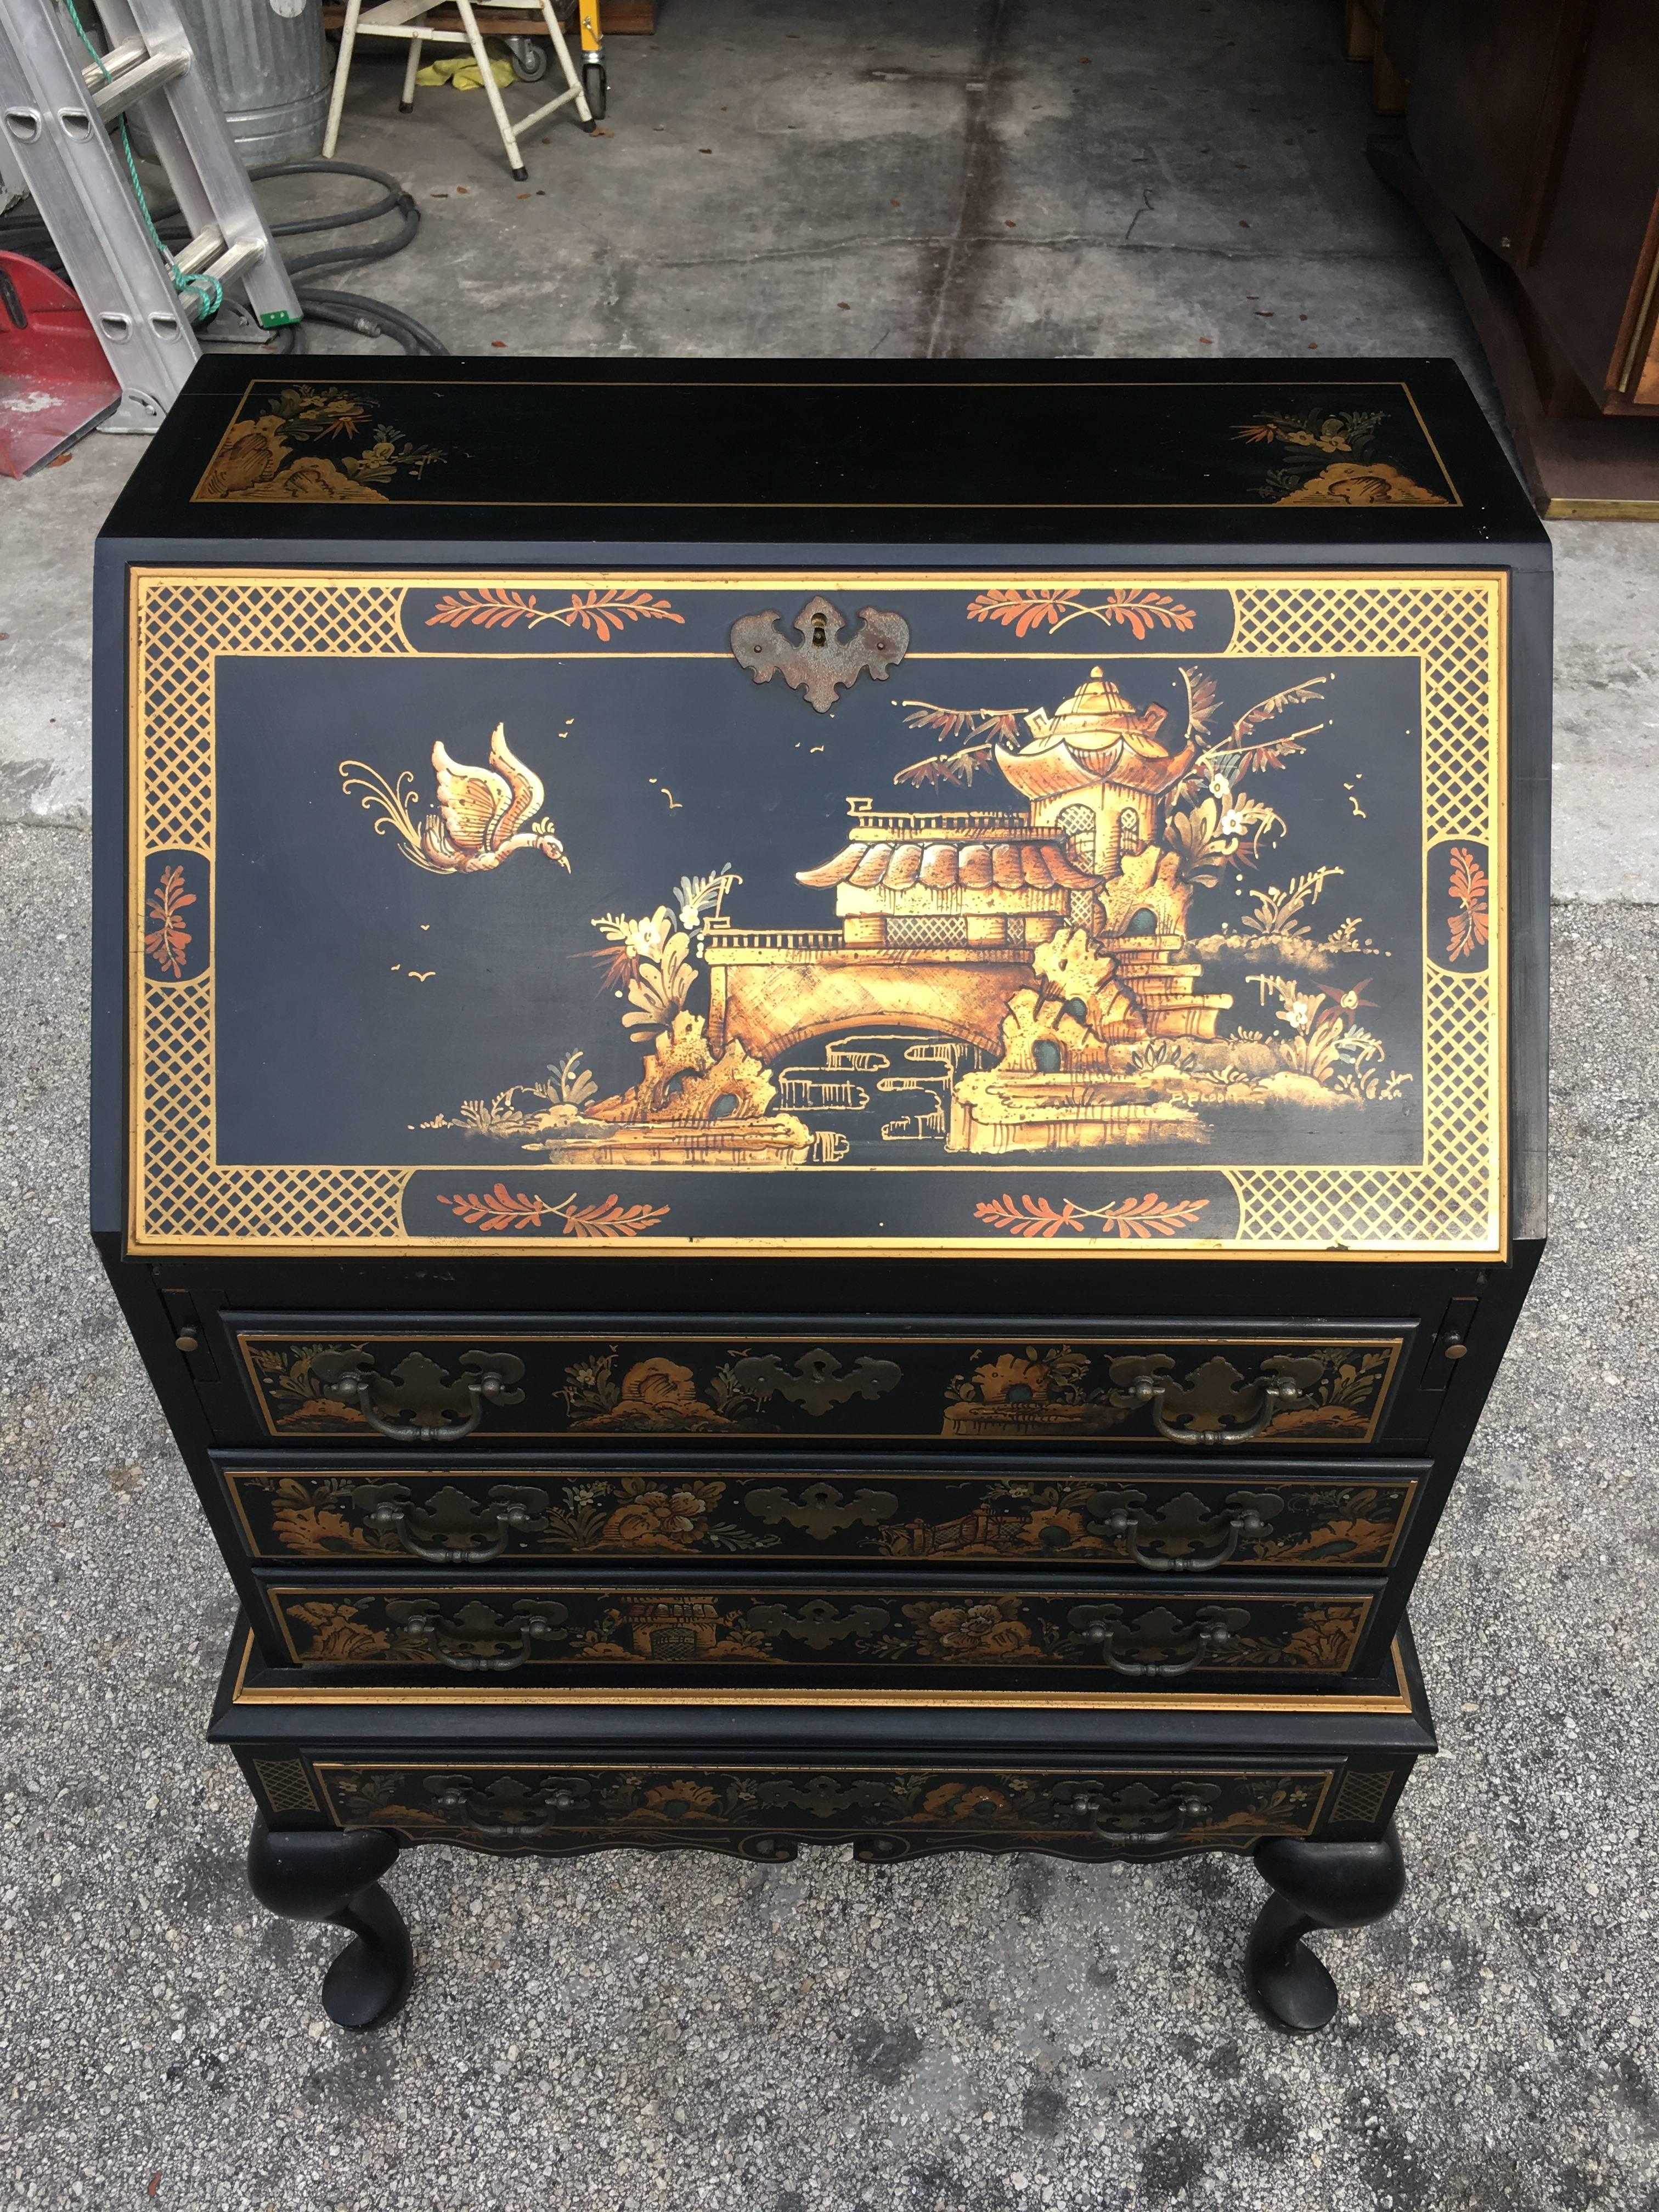 A Mid-Century Modern Chinese style secretary, circa 1950s. Highly ornate, hand-painted details.